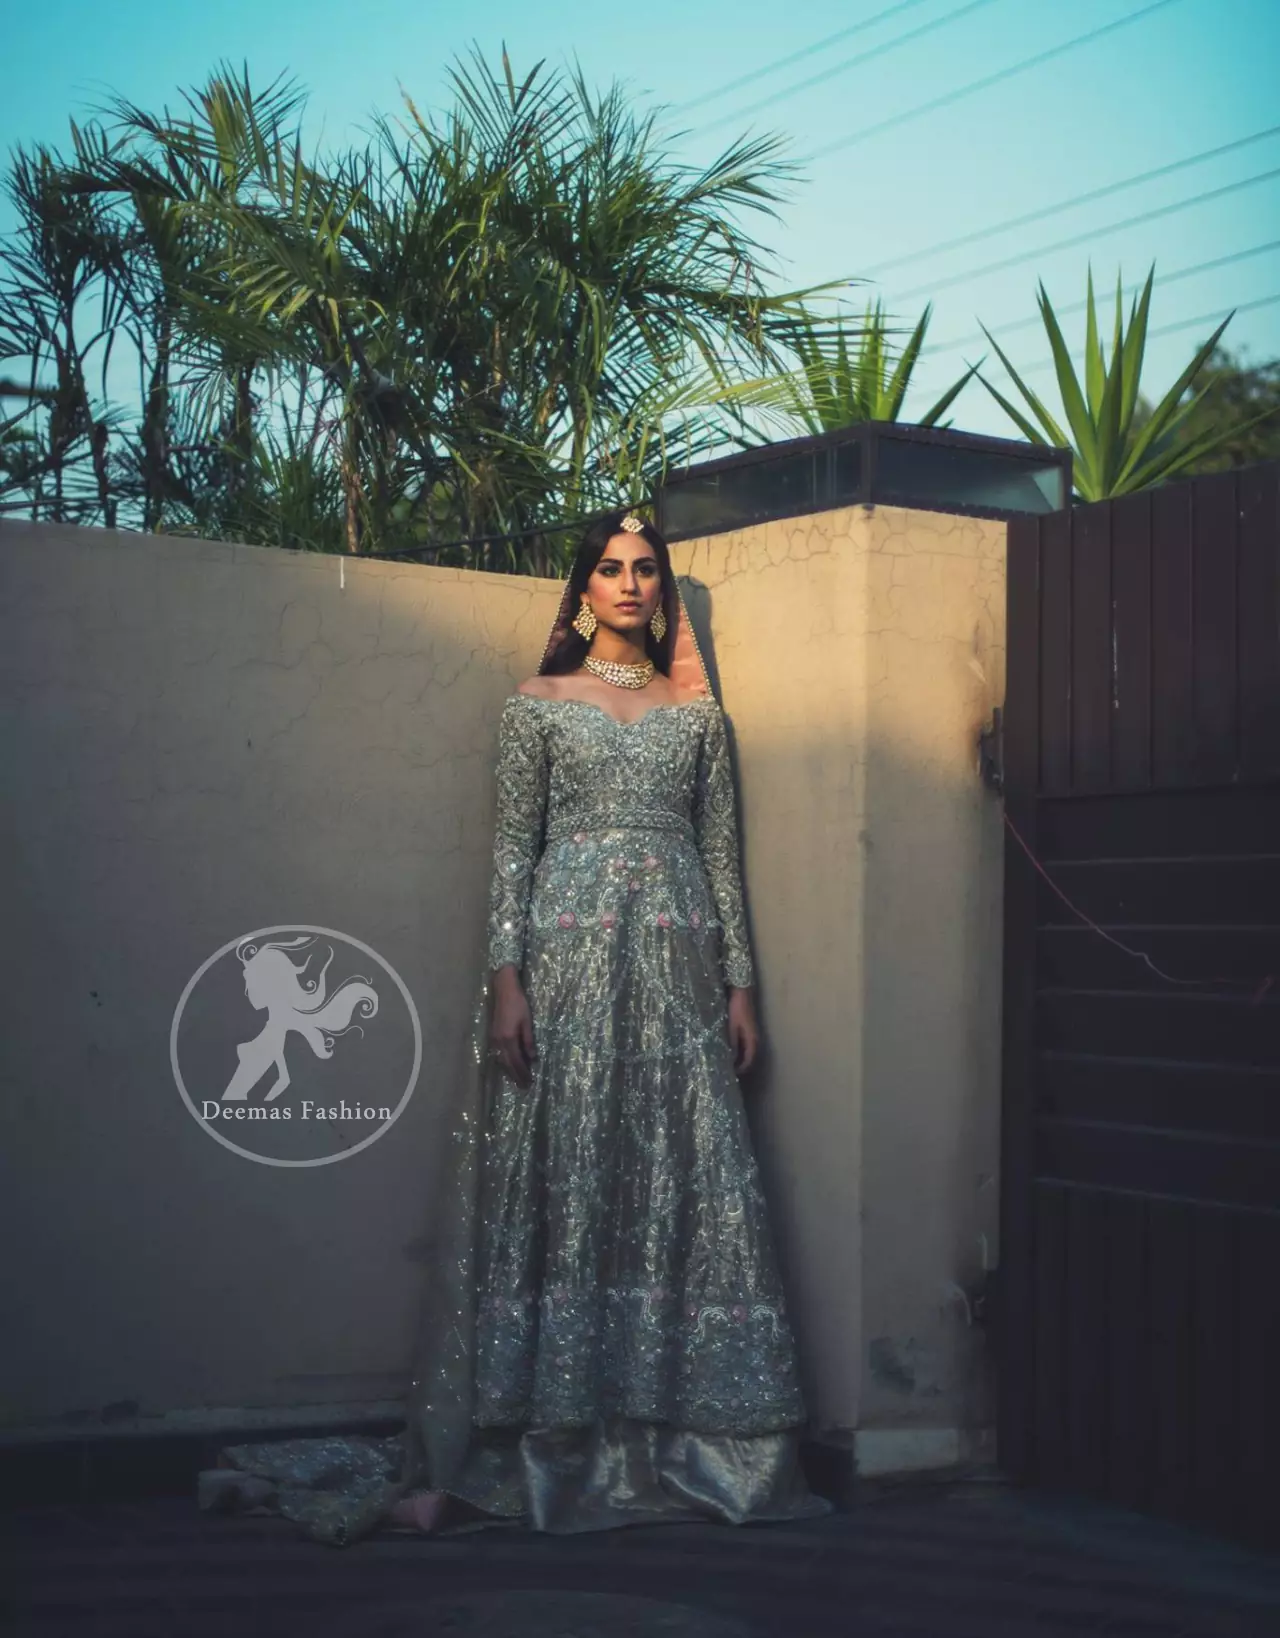 The frock has been adorned with a fully embroidered bodice. The frock features beautiful and fabulous embellishment front and back. The dress contains a working border on the hemline. Compliment with embellished waist belt. Dupatta has a four-sided embroidered border.